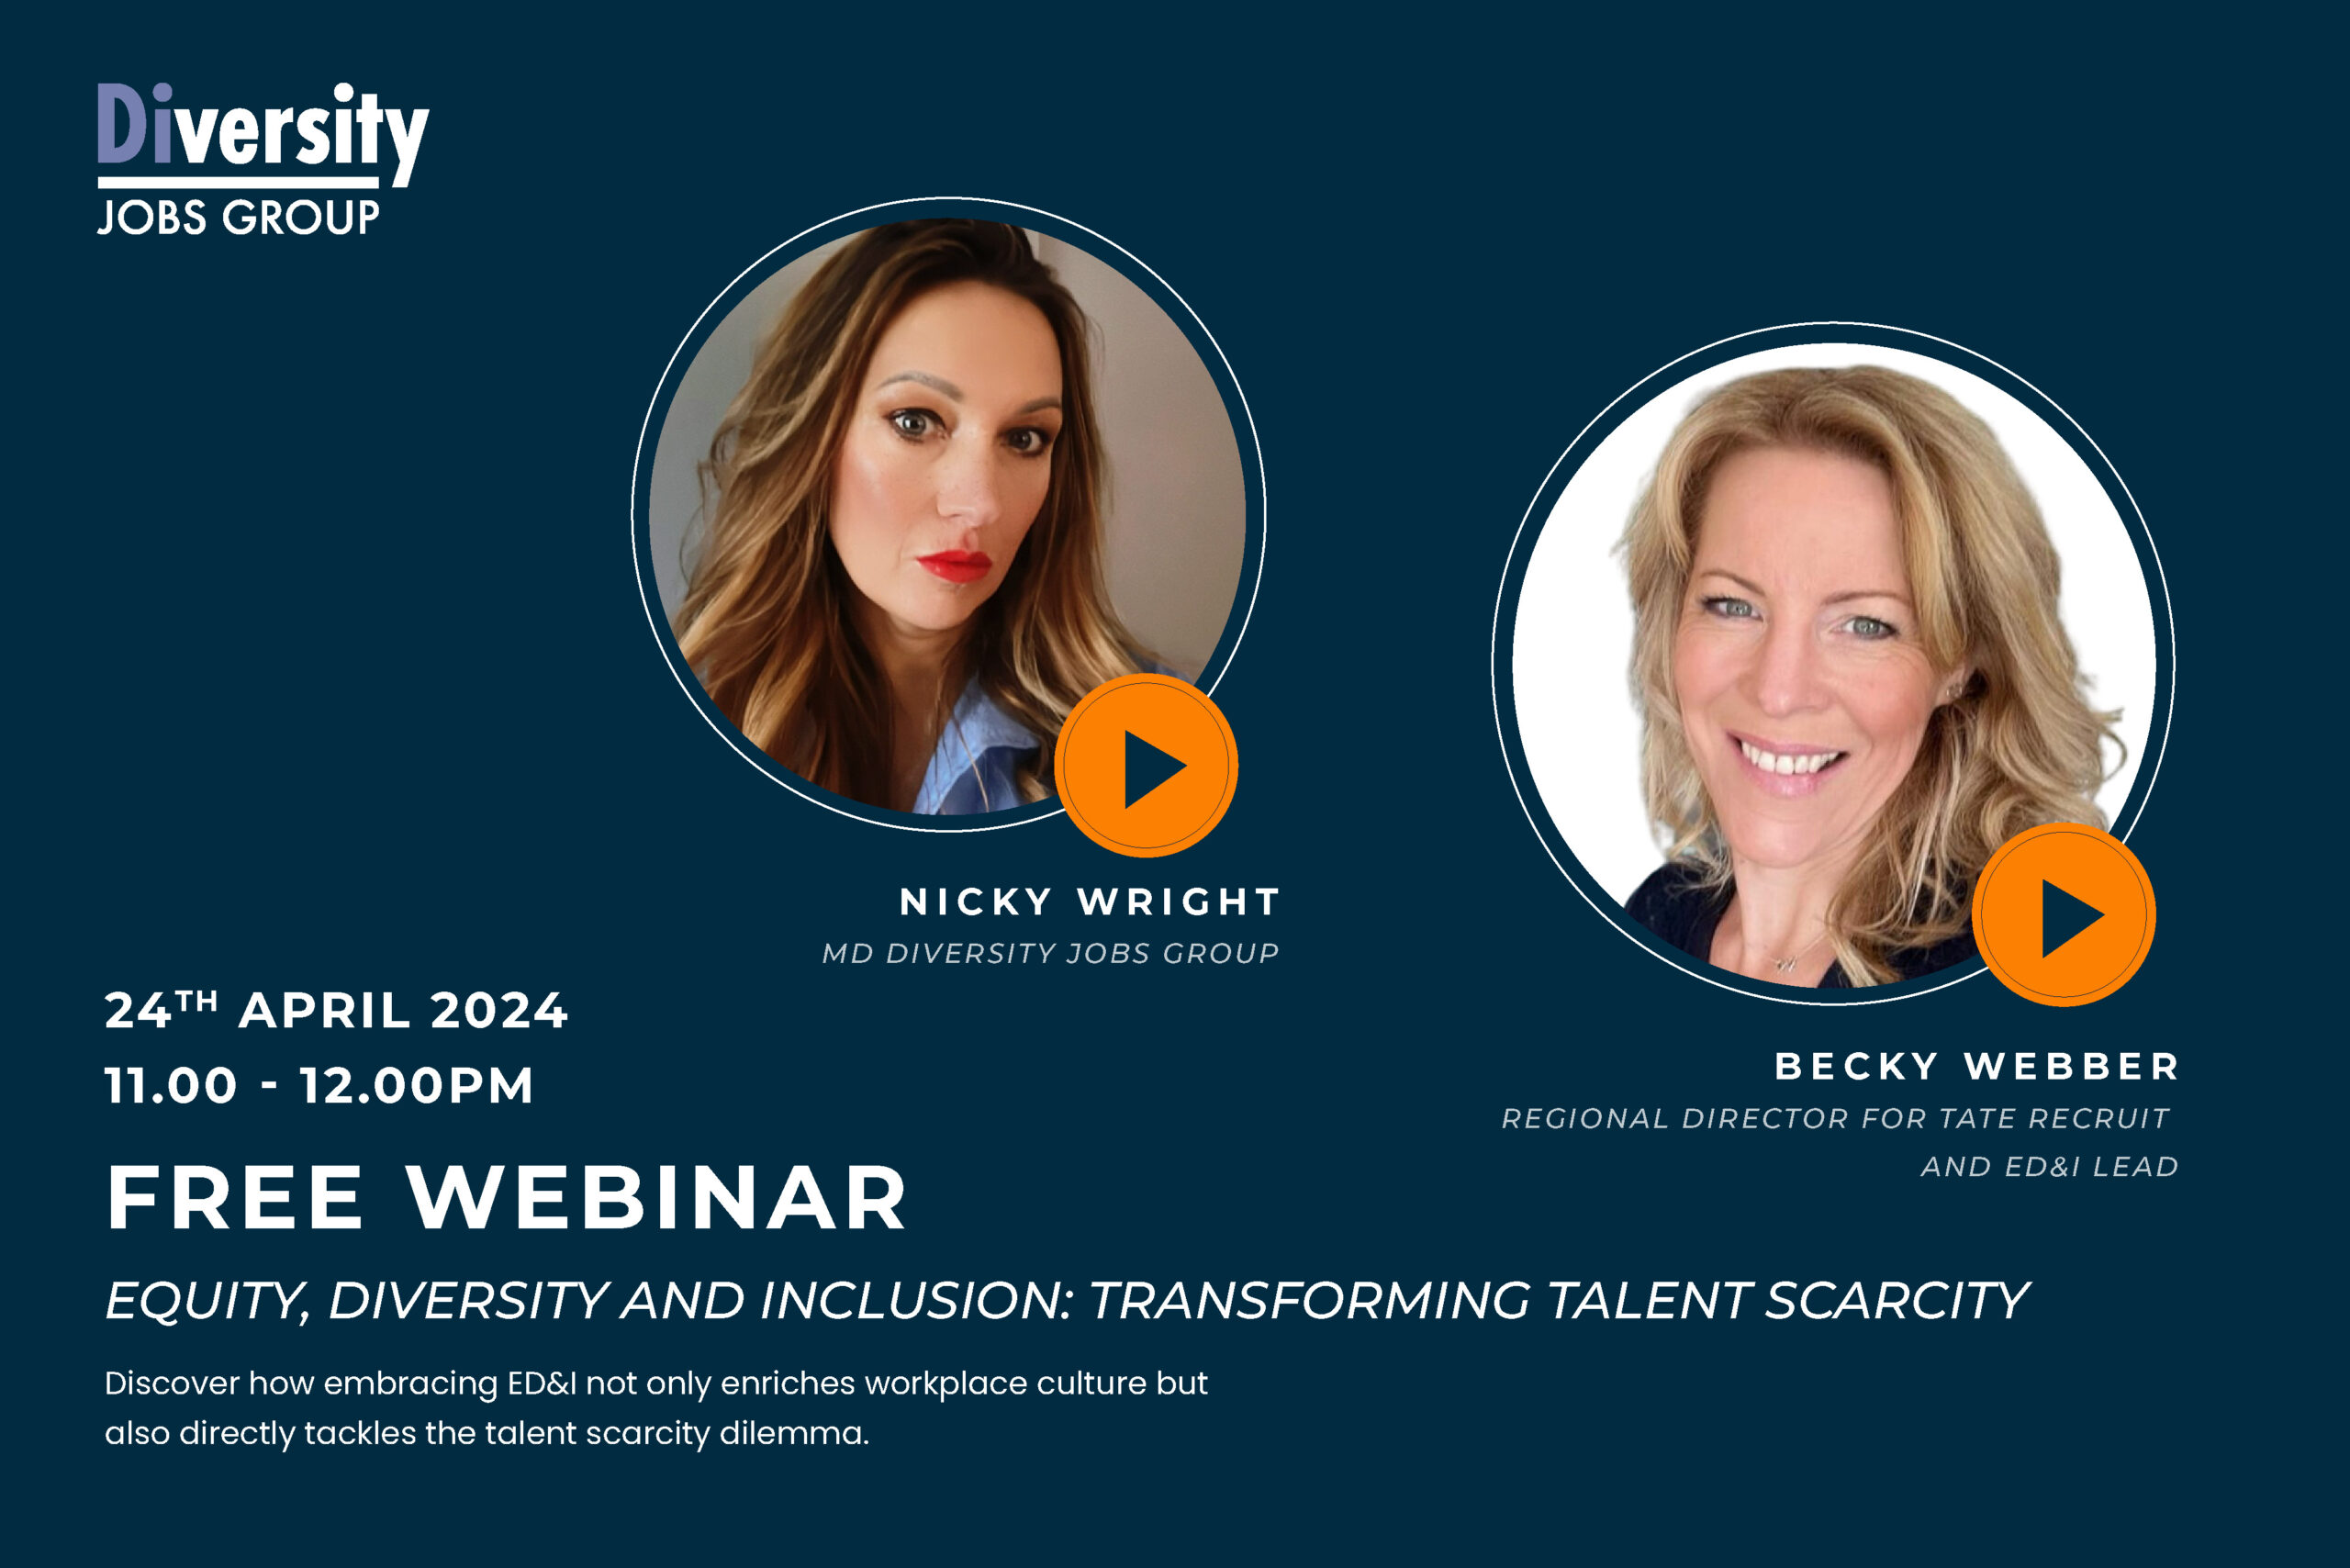 FREE Webinar: Equity, Diversity, and Inclusion: Transforming Talent Scarcity